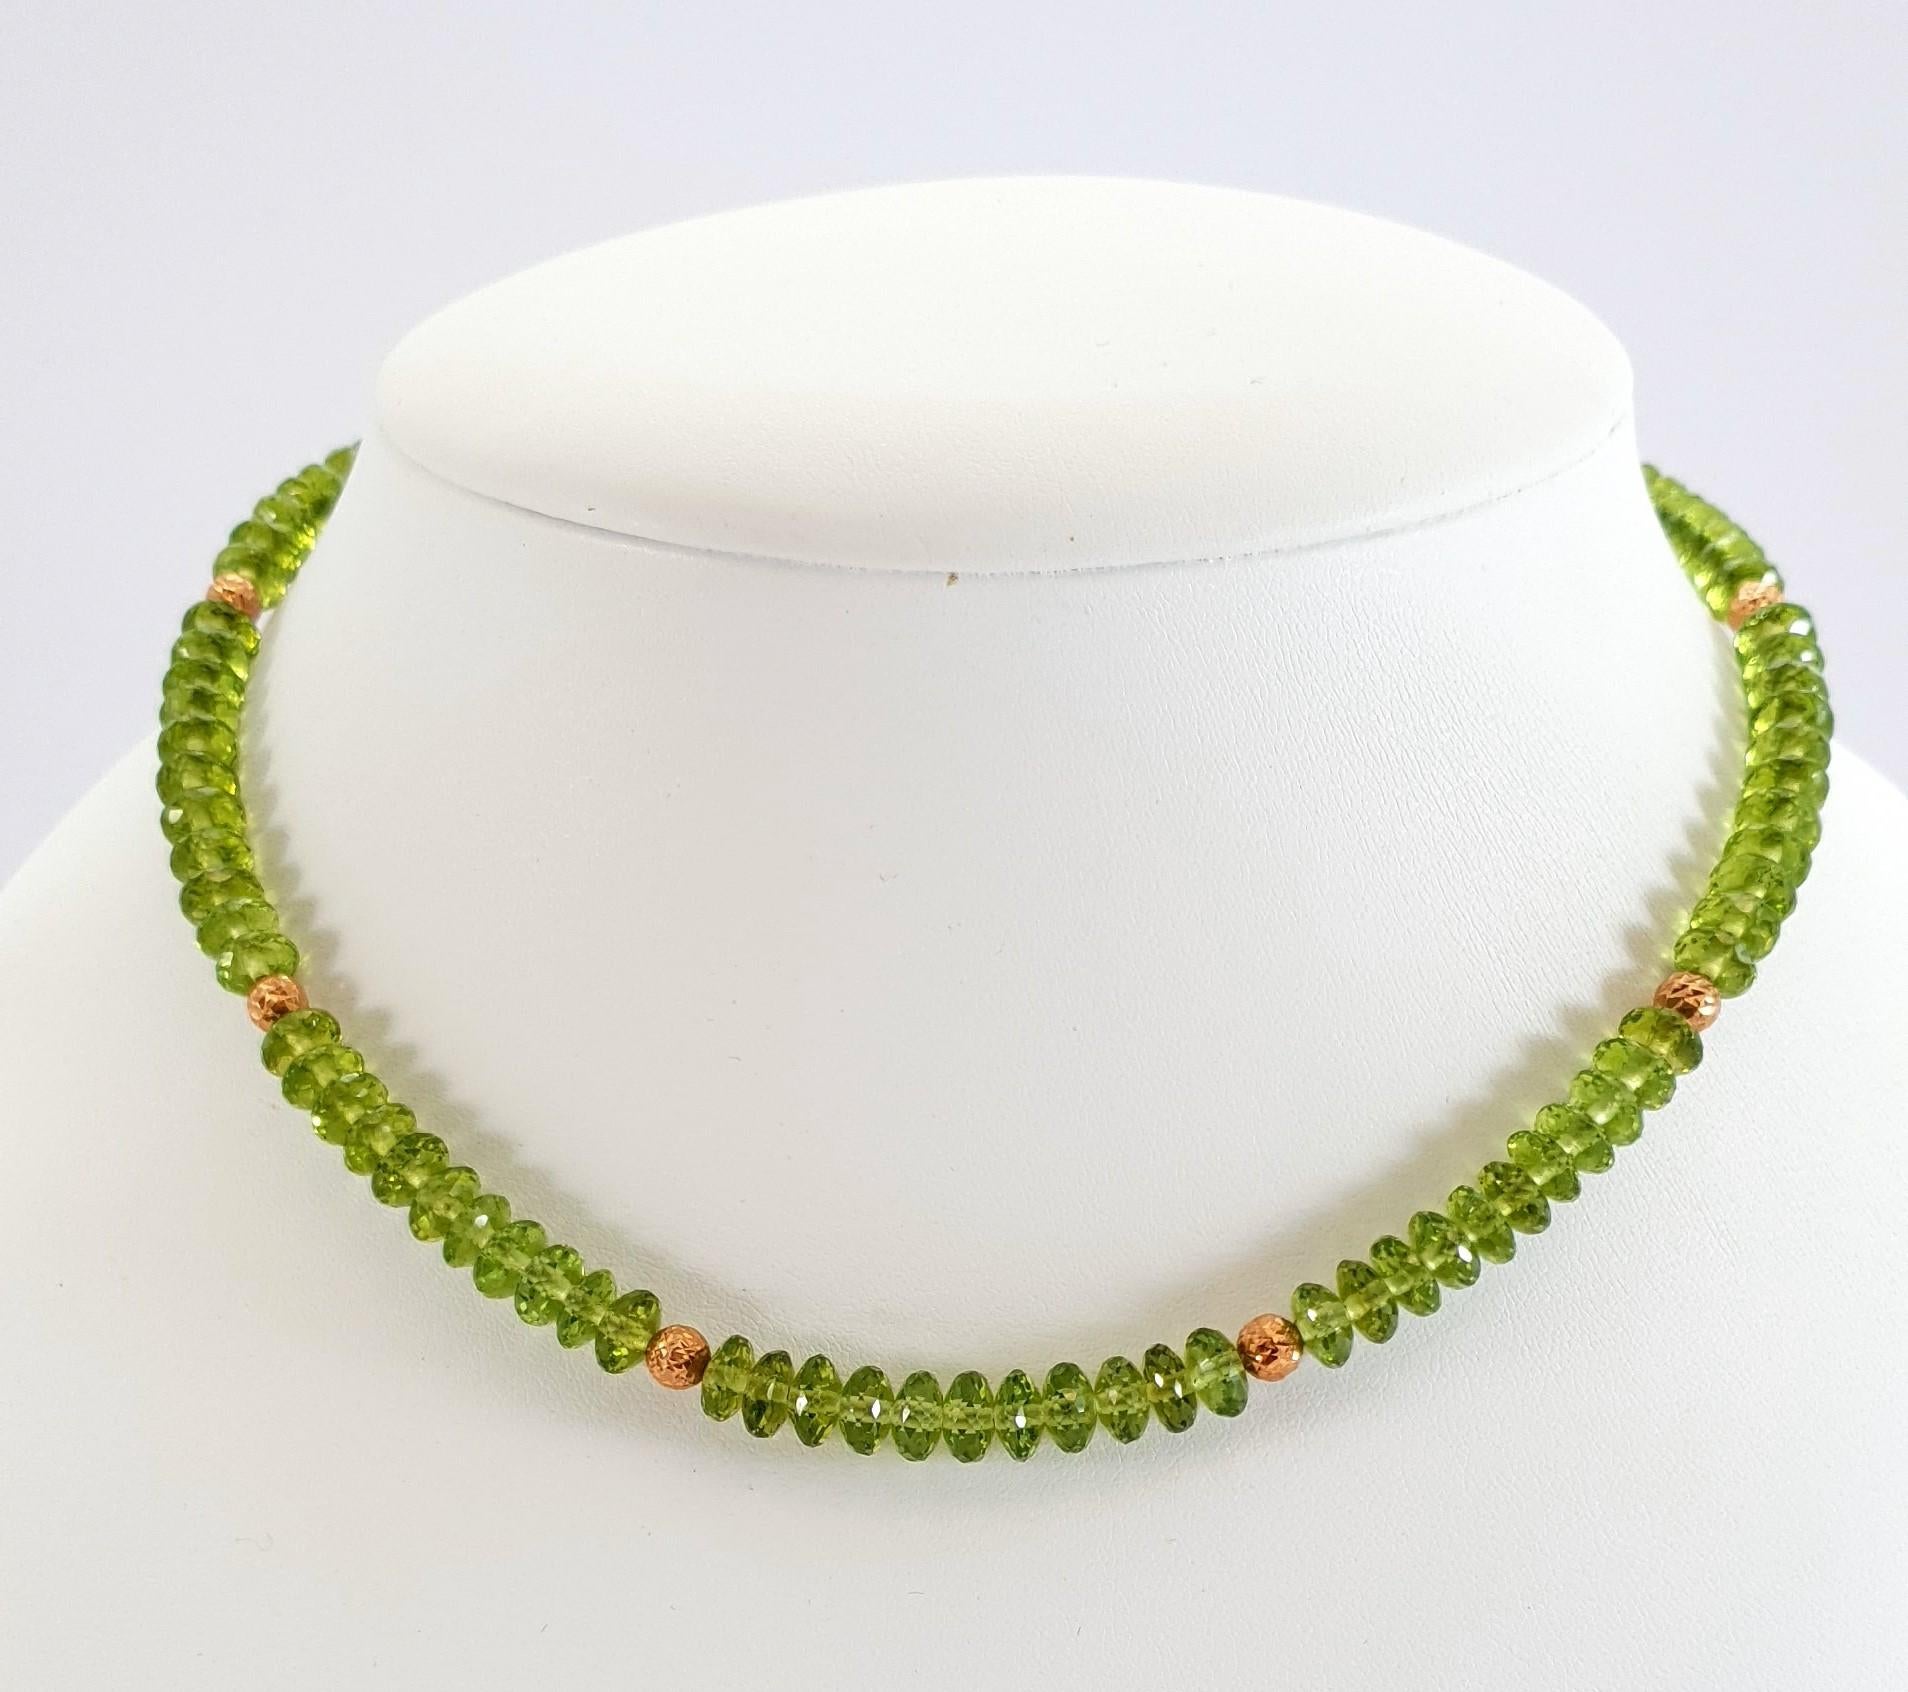 This Faceted Green Peridot Rondel Beaded Necklace with 18 Carat Rose Gold is totally handmade. Cutting as well as goldwork are made in German quality. The screw clasp is easy to handle and very secure.
Timeless and classic design combined with